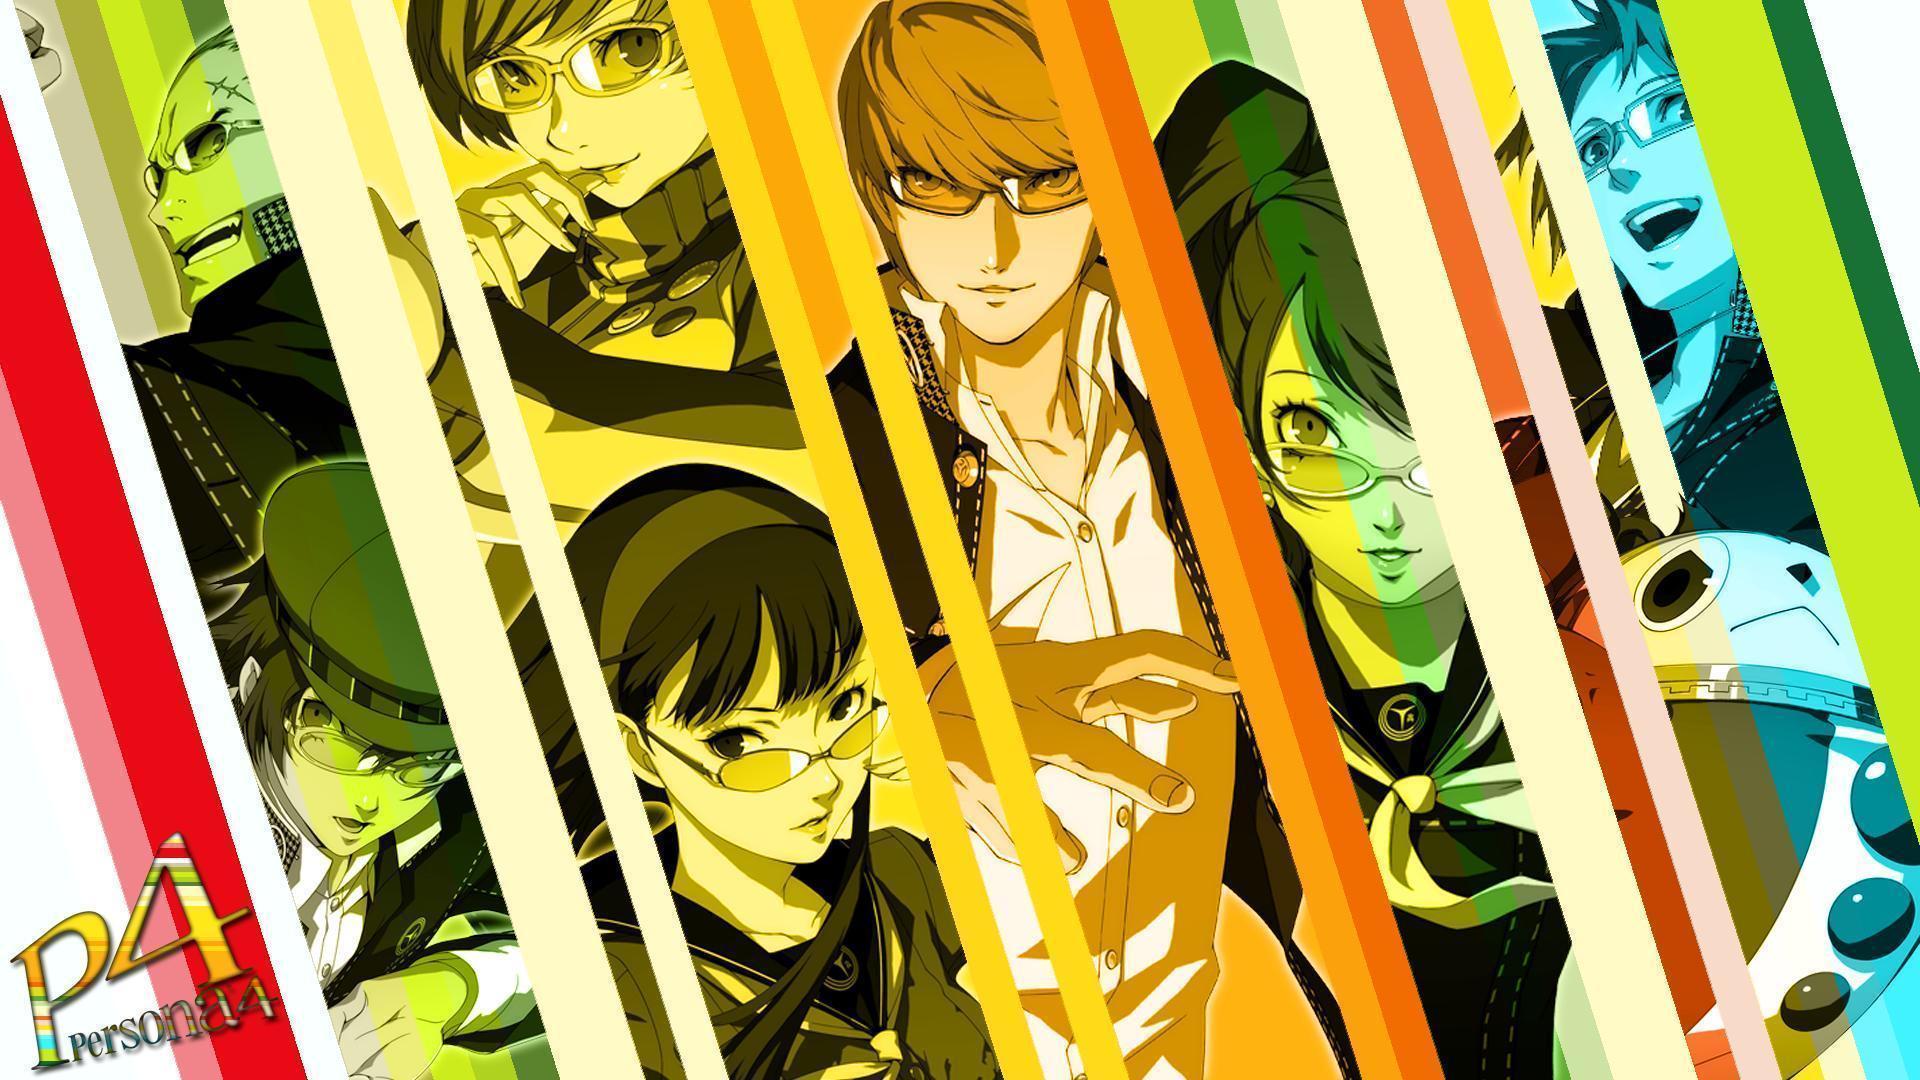 Persona 4 Wallpapers HD , Games, Persona 4 Game, Persona 4